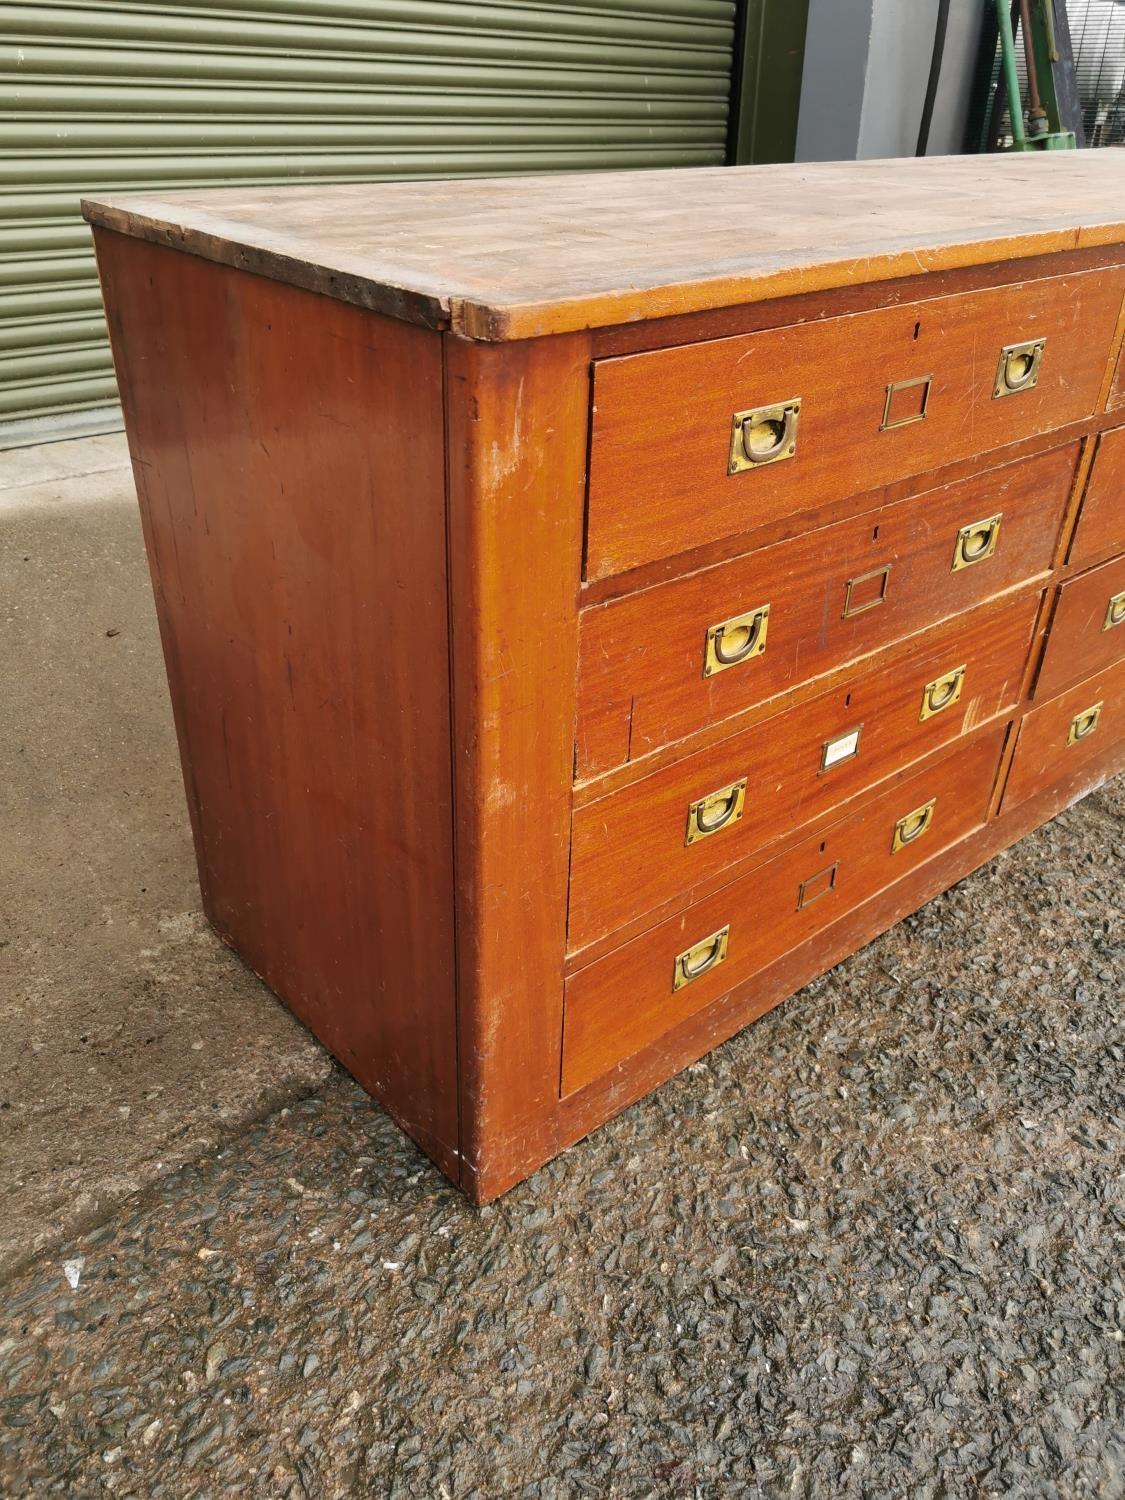 Early 20th C. mahogany haberdashery cabinet with eight drawers and brass handles {84 cm H x 194 cm W - Image 4 of 4